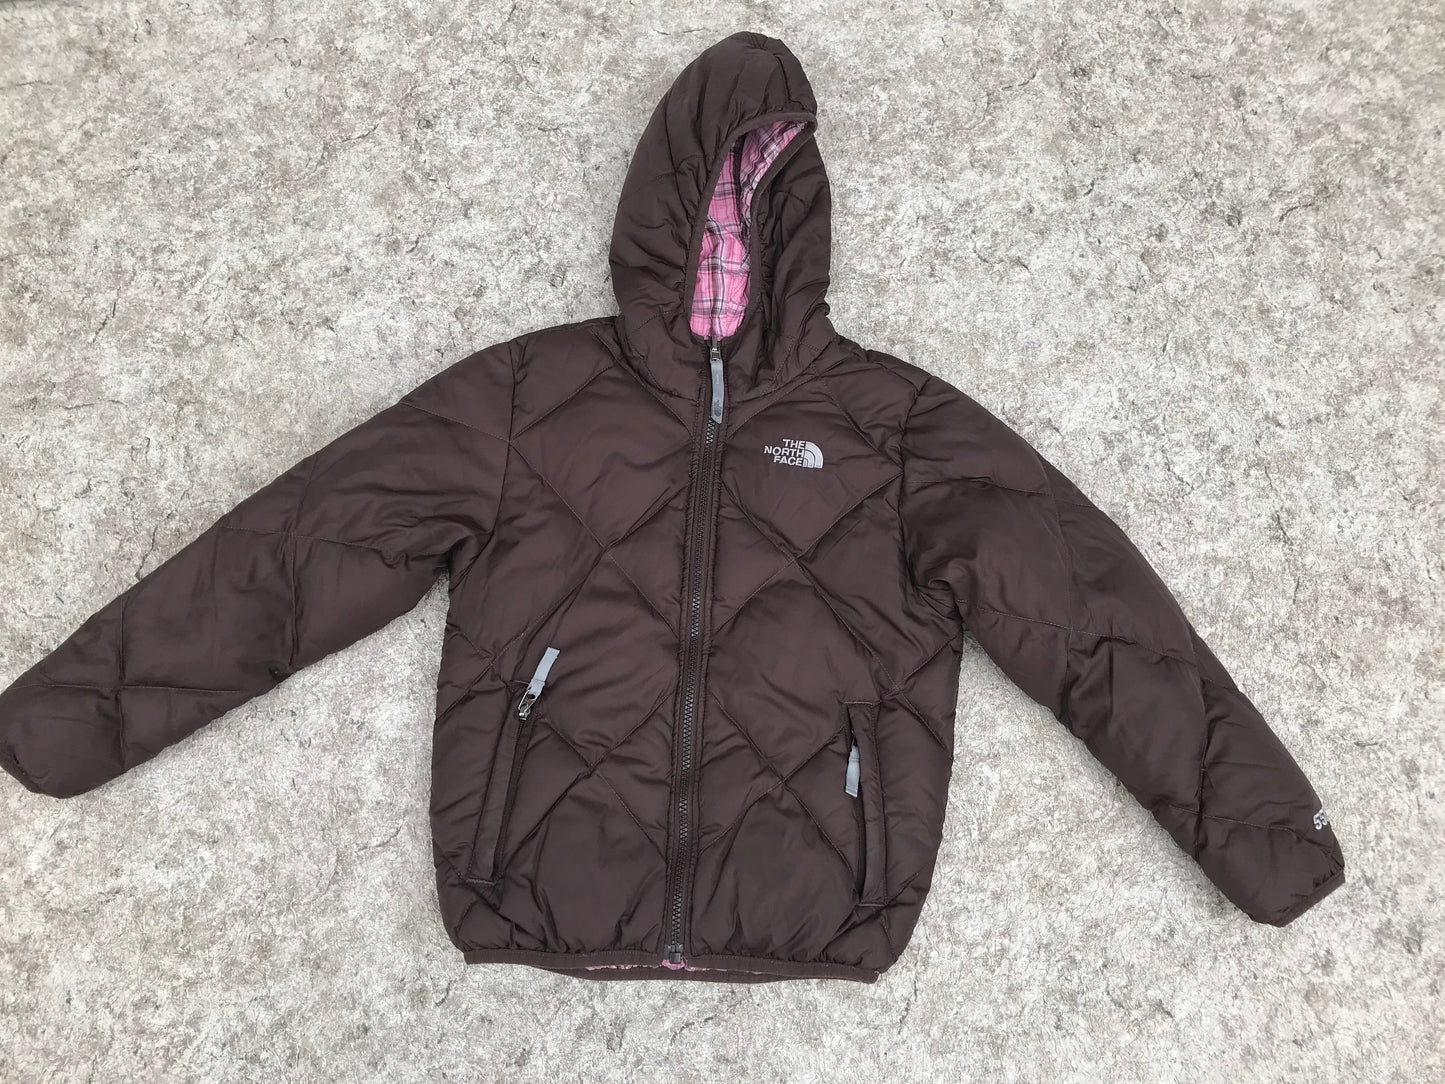 Winter Coat Child Size 7-8 The North Face 550 Goose Down Fill Small Repair Fixed Inside Brown Pink